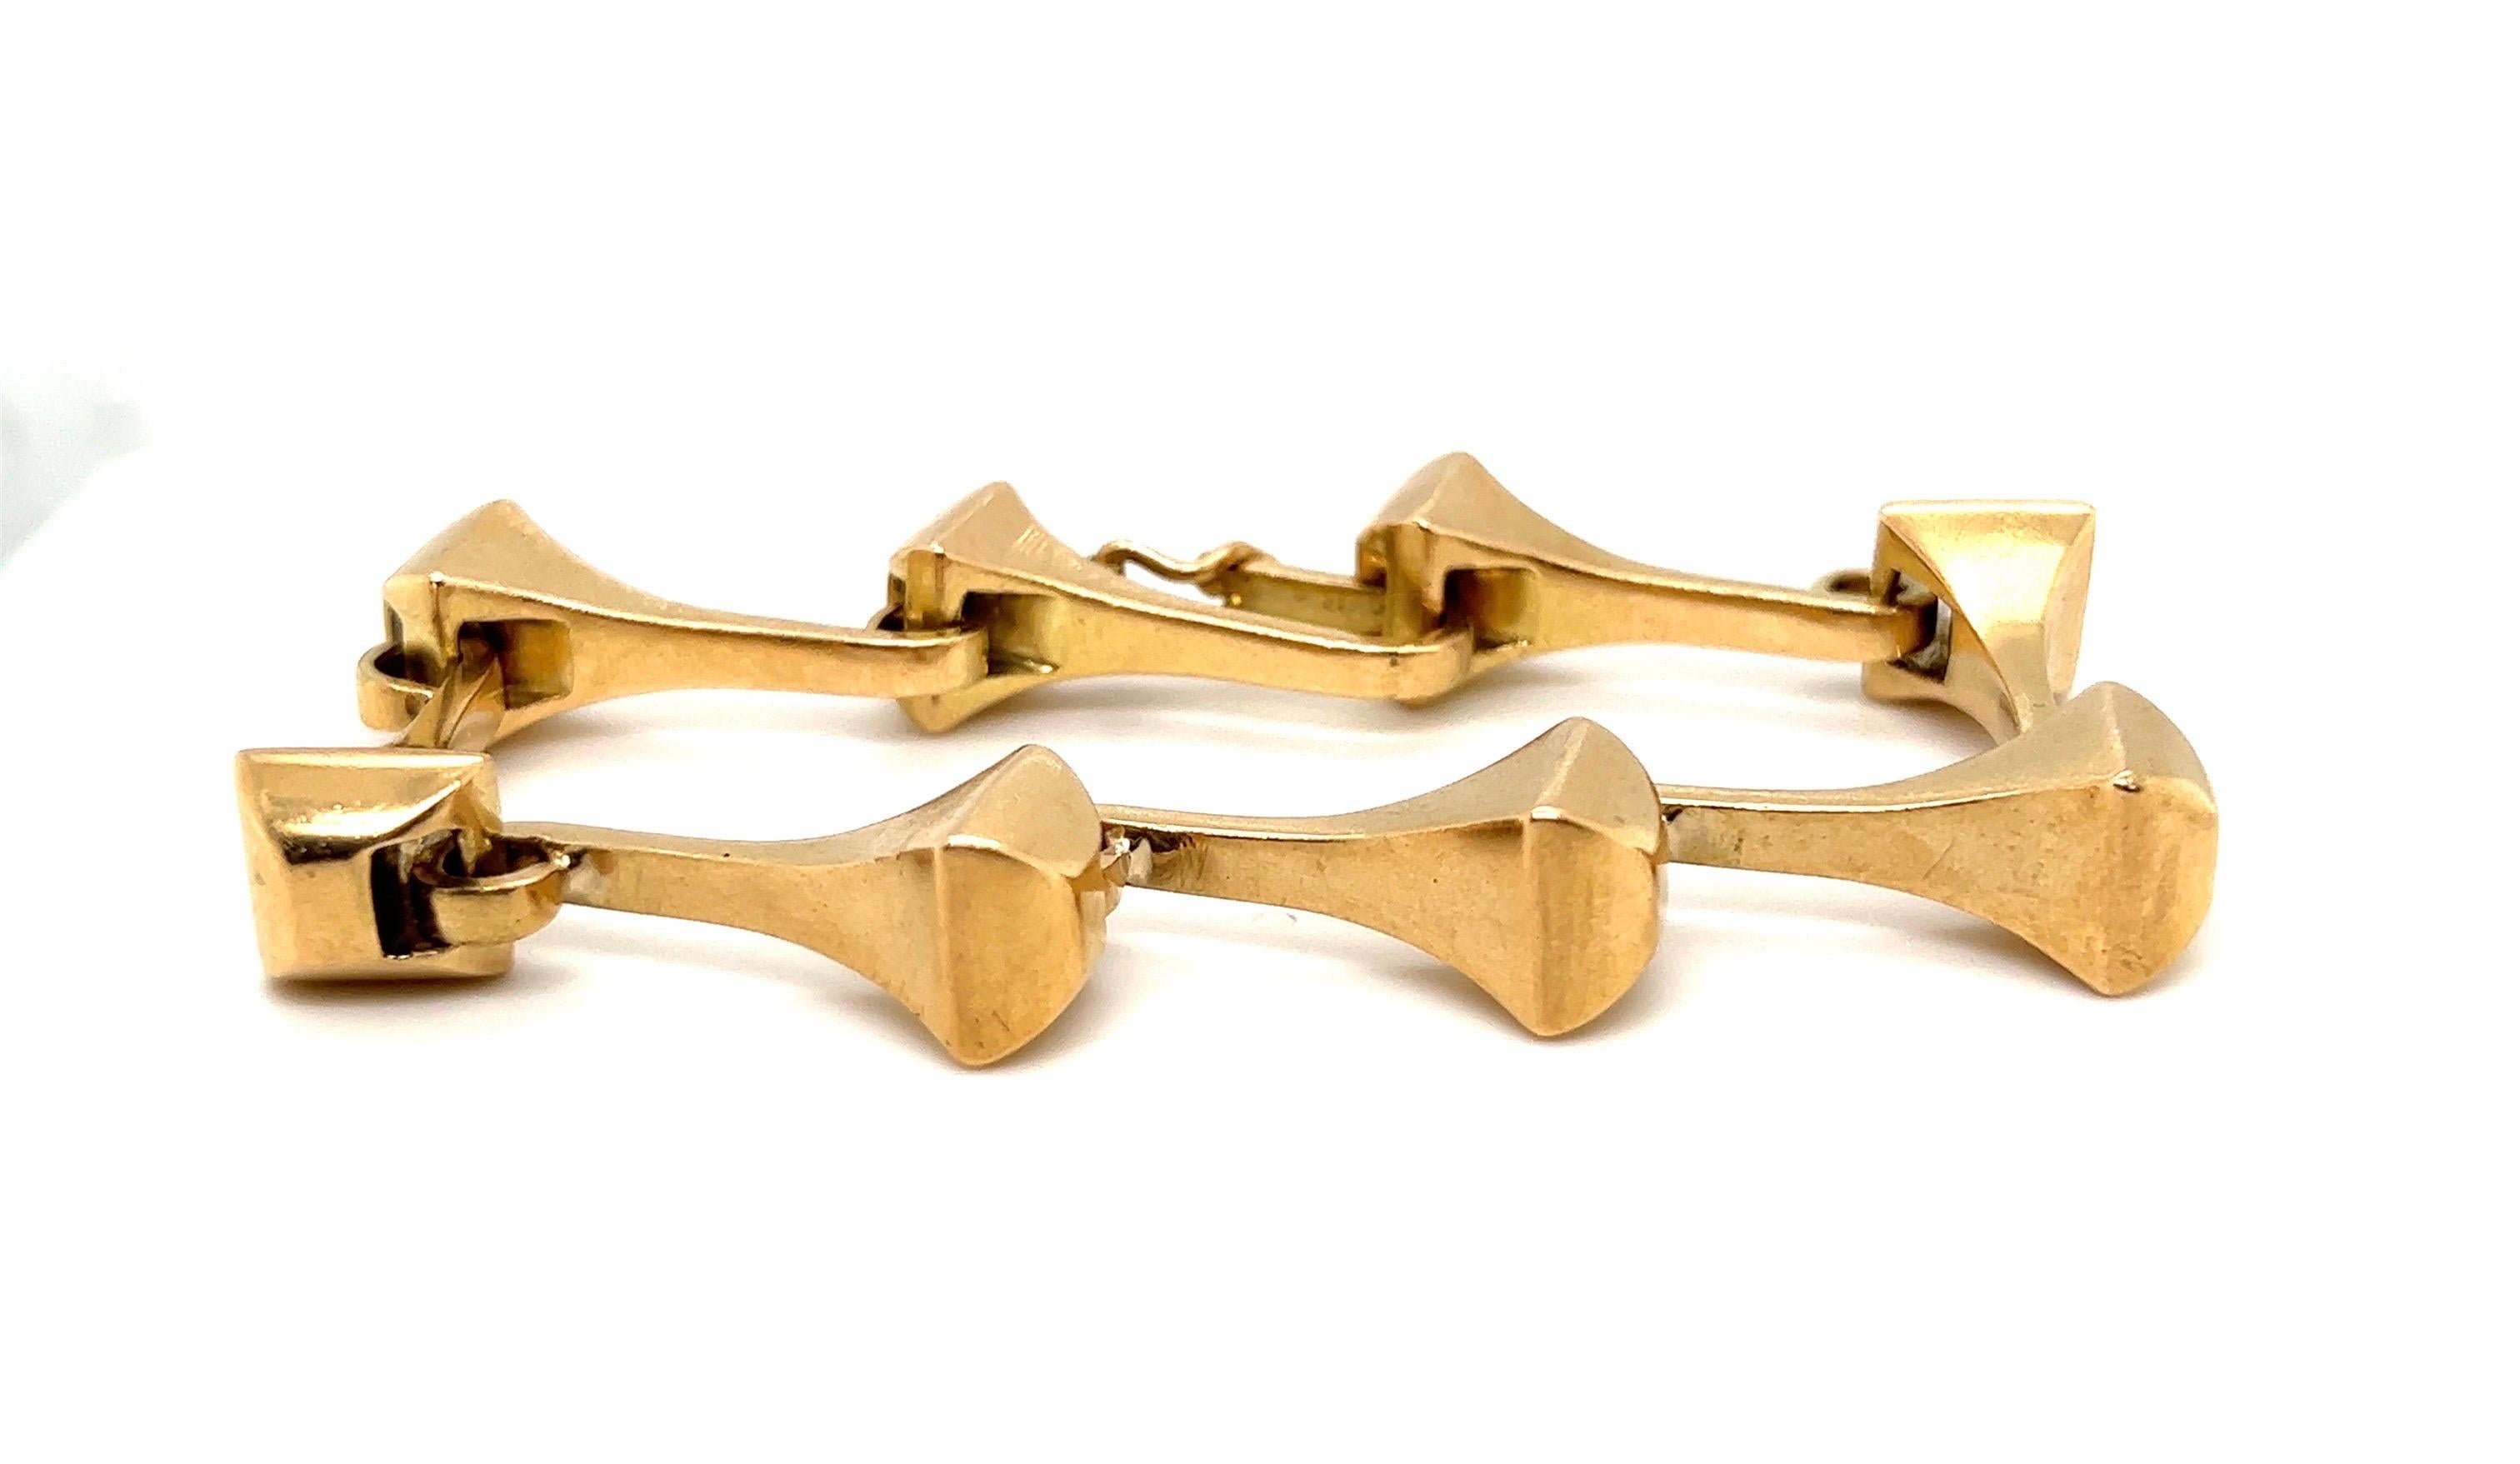 Striking 18 karat yellow gold horseshoe nail bracelet by Gucci, 1970s.
Crafted in 18 karat solid yellow gold and designed as a line of 8 interlocking stylized horseshoe nails. The bracelet closes with a locking clasp completed by a safety latch.